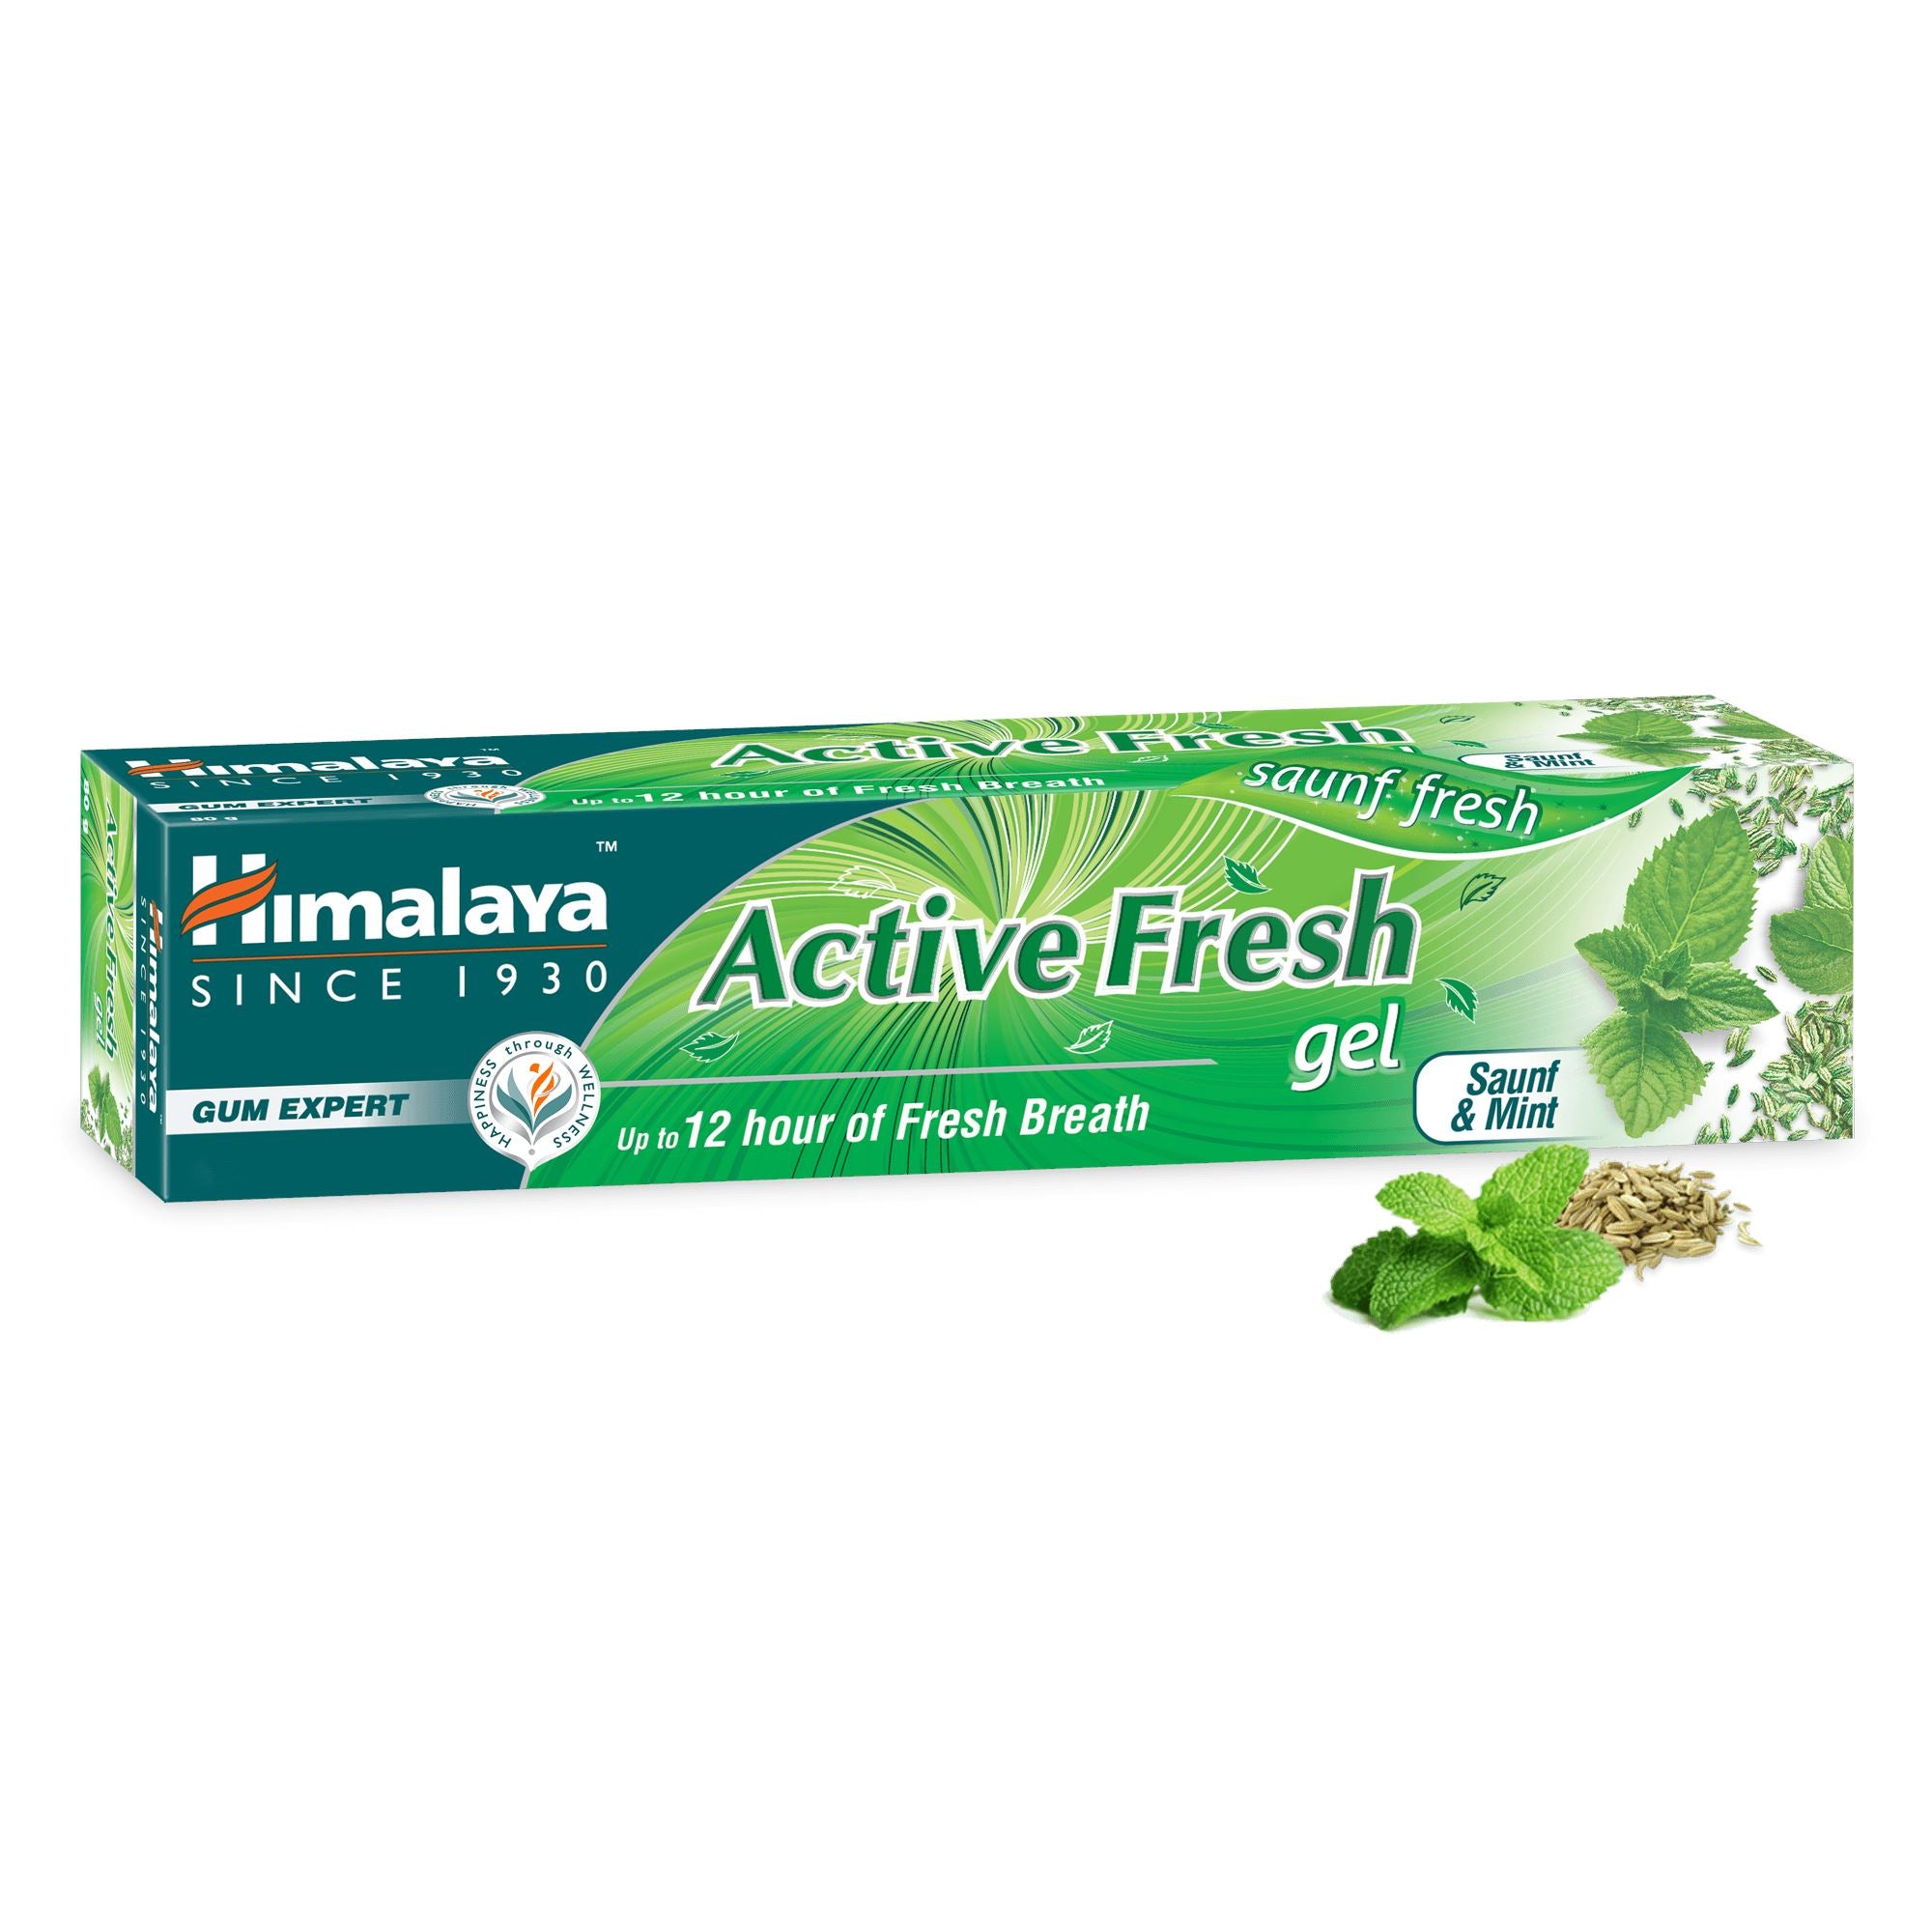 Himalaya Active Fresh Gel - For fresh breadth and healthy gums